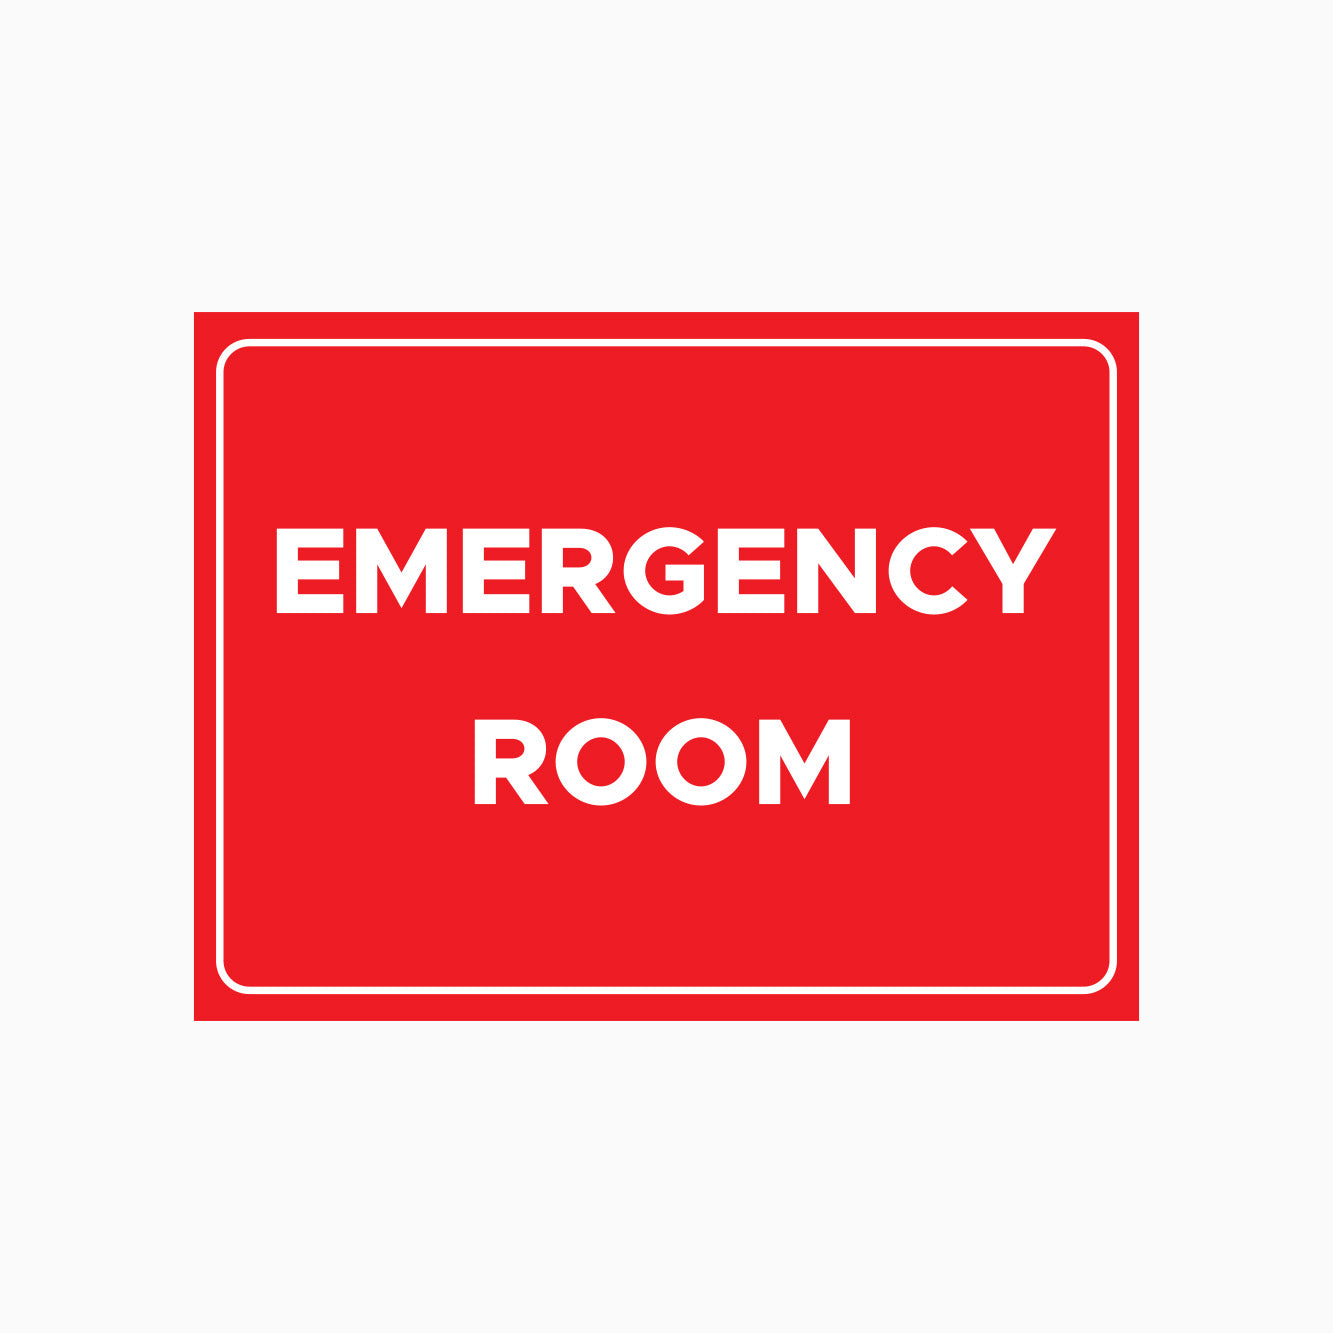 EMERGENCY ROOM SIGN - GET SIGNS